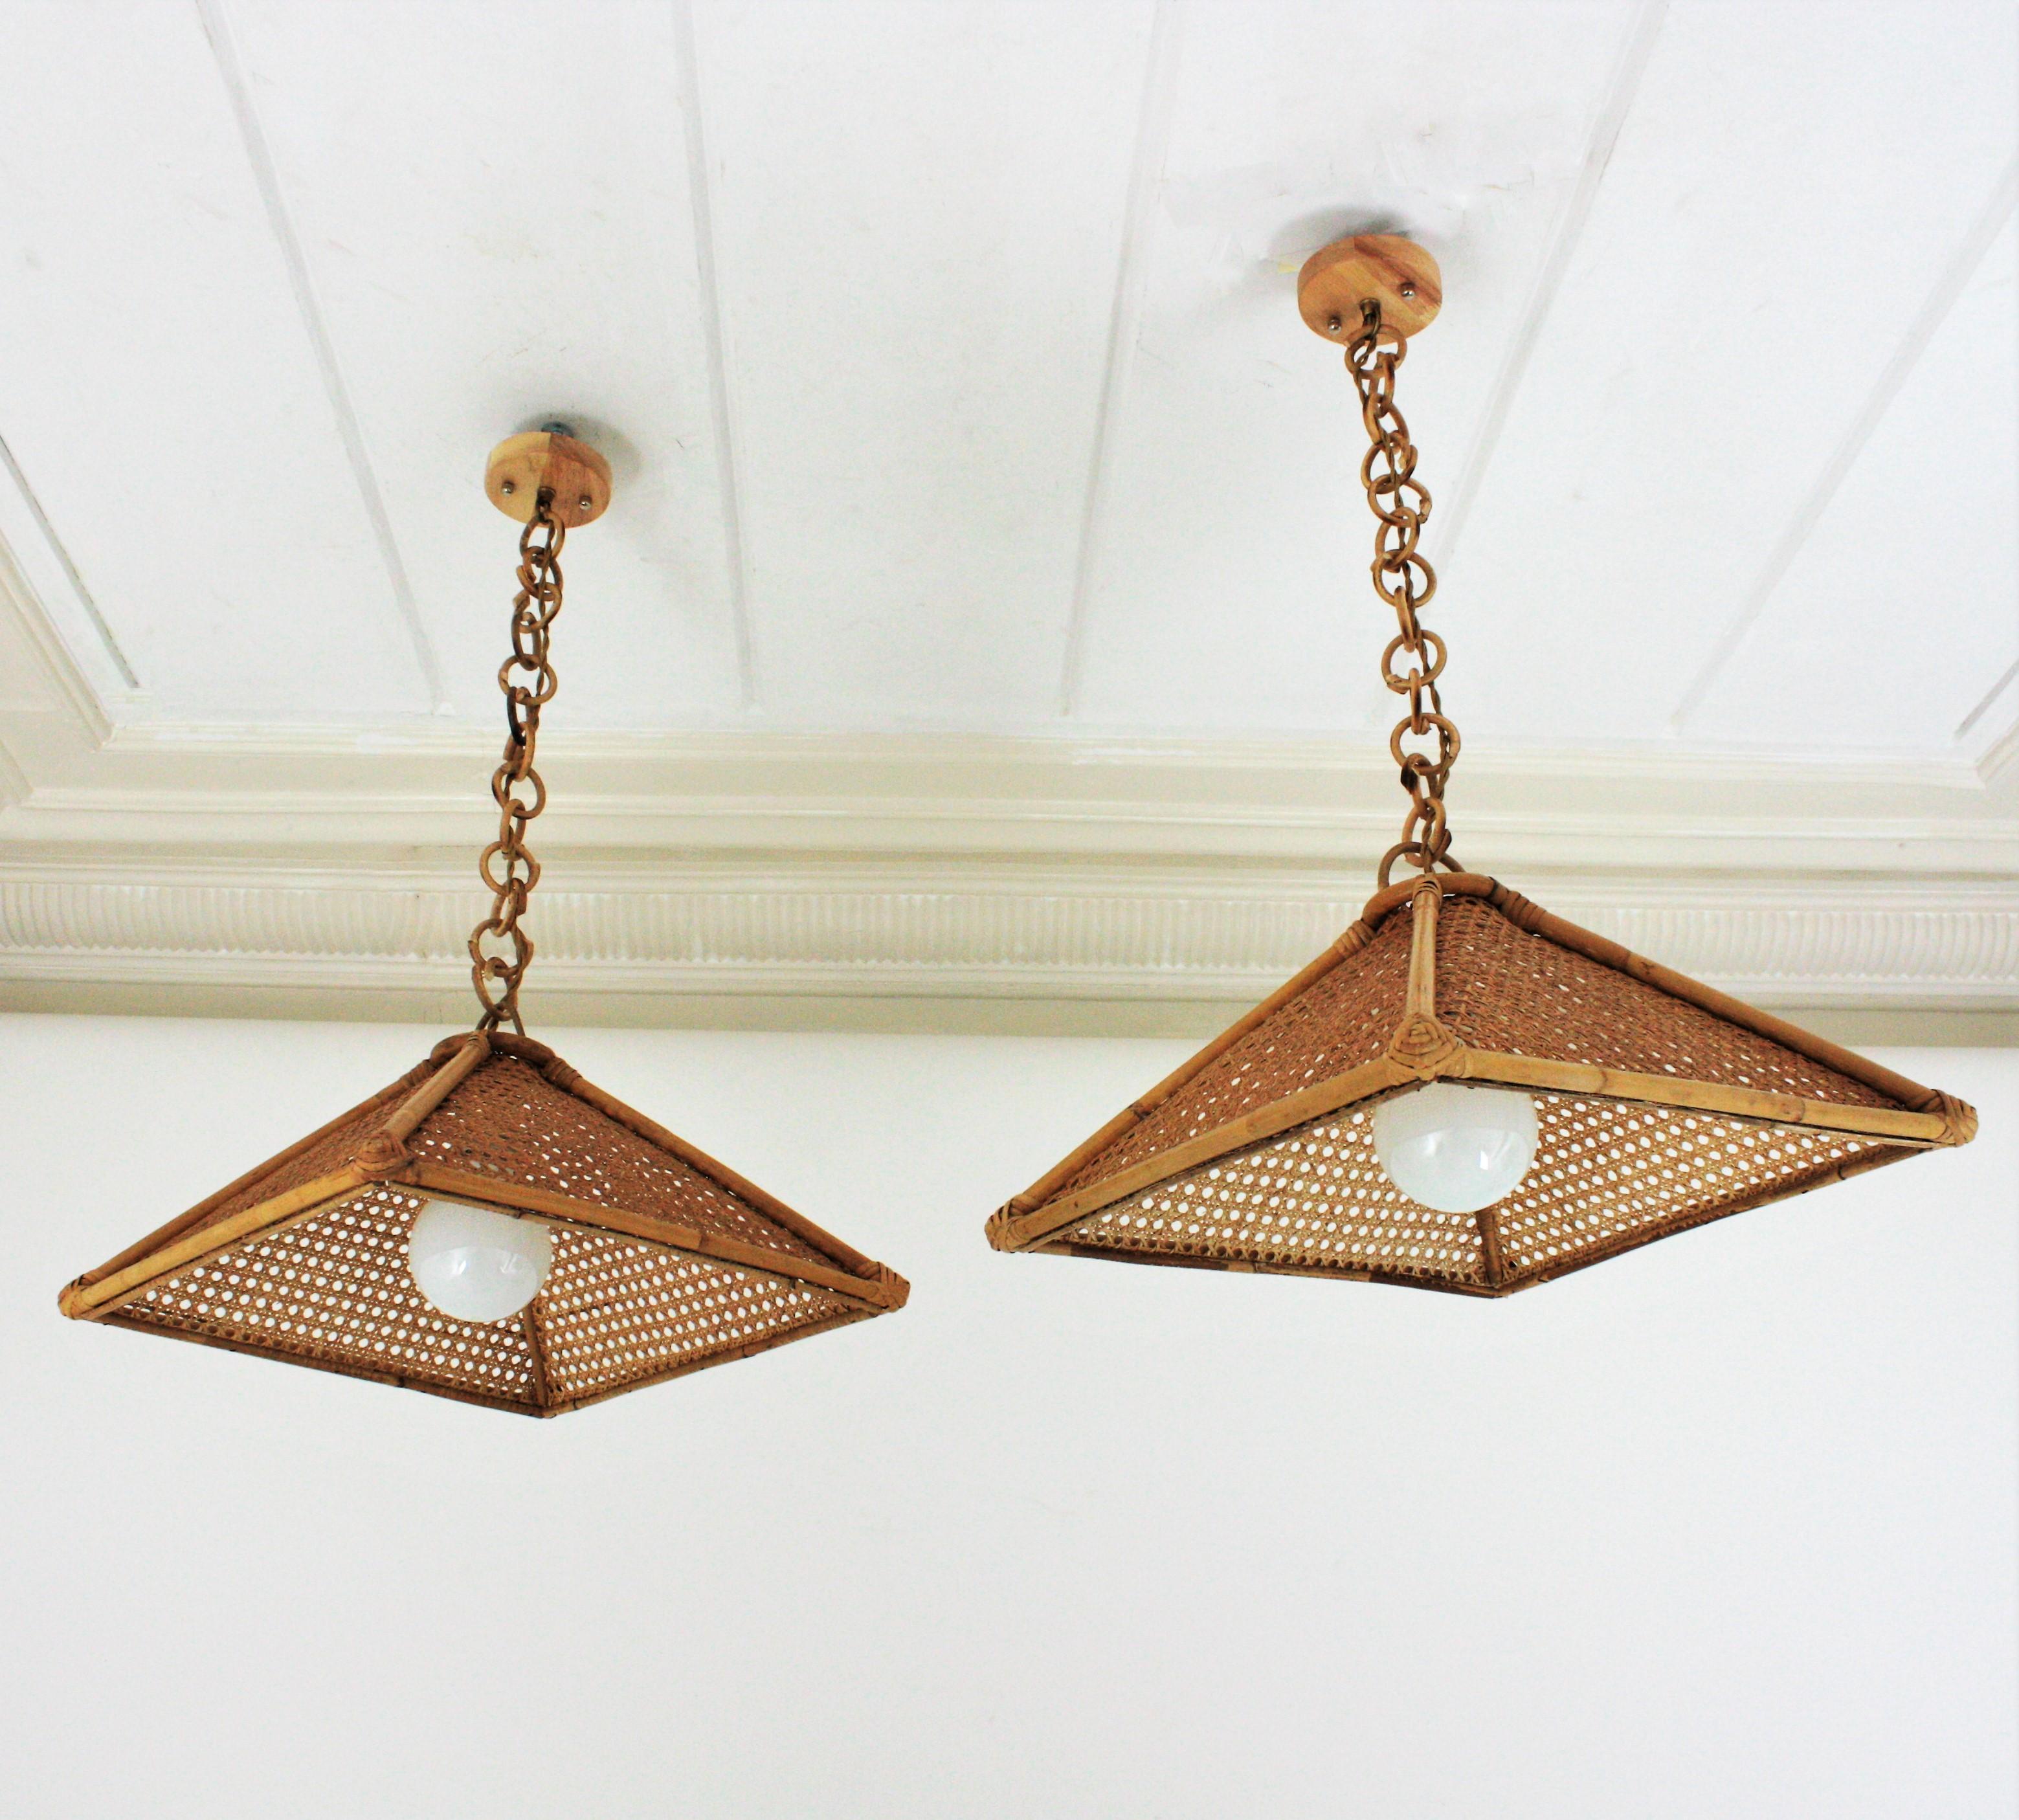 Pair of Mid-Century Modern woven wicker wire and rattan trapezoid shaped pendants / chandeliers. Spain, 1960s
This pair of suspension lamps feature a trapezoid rattan structure with wicker wire panels hanging from a chain with round rattan links